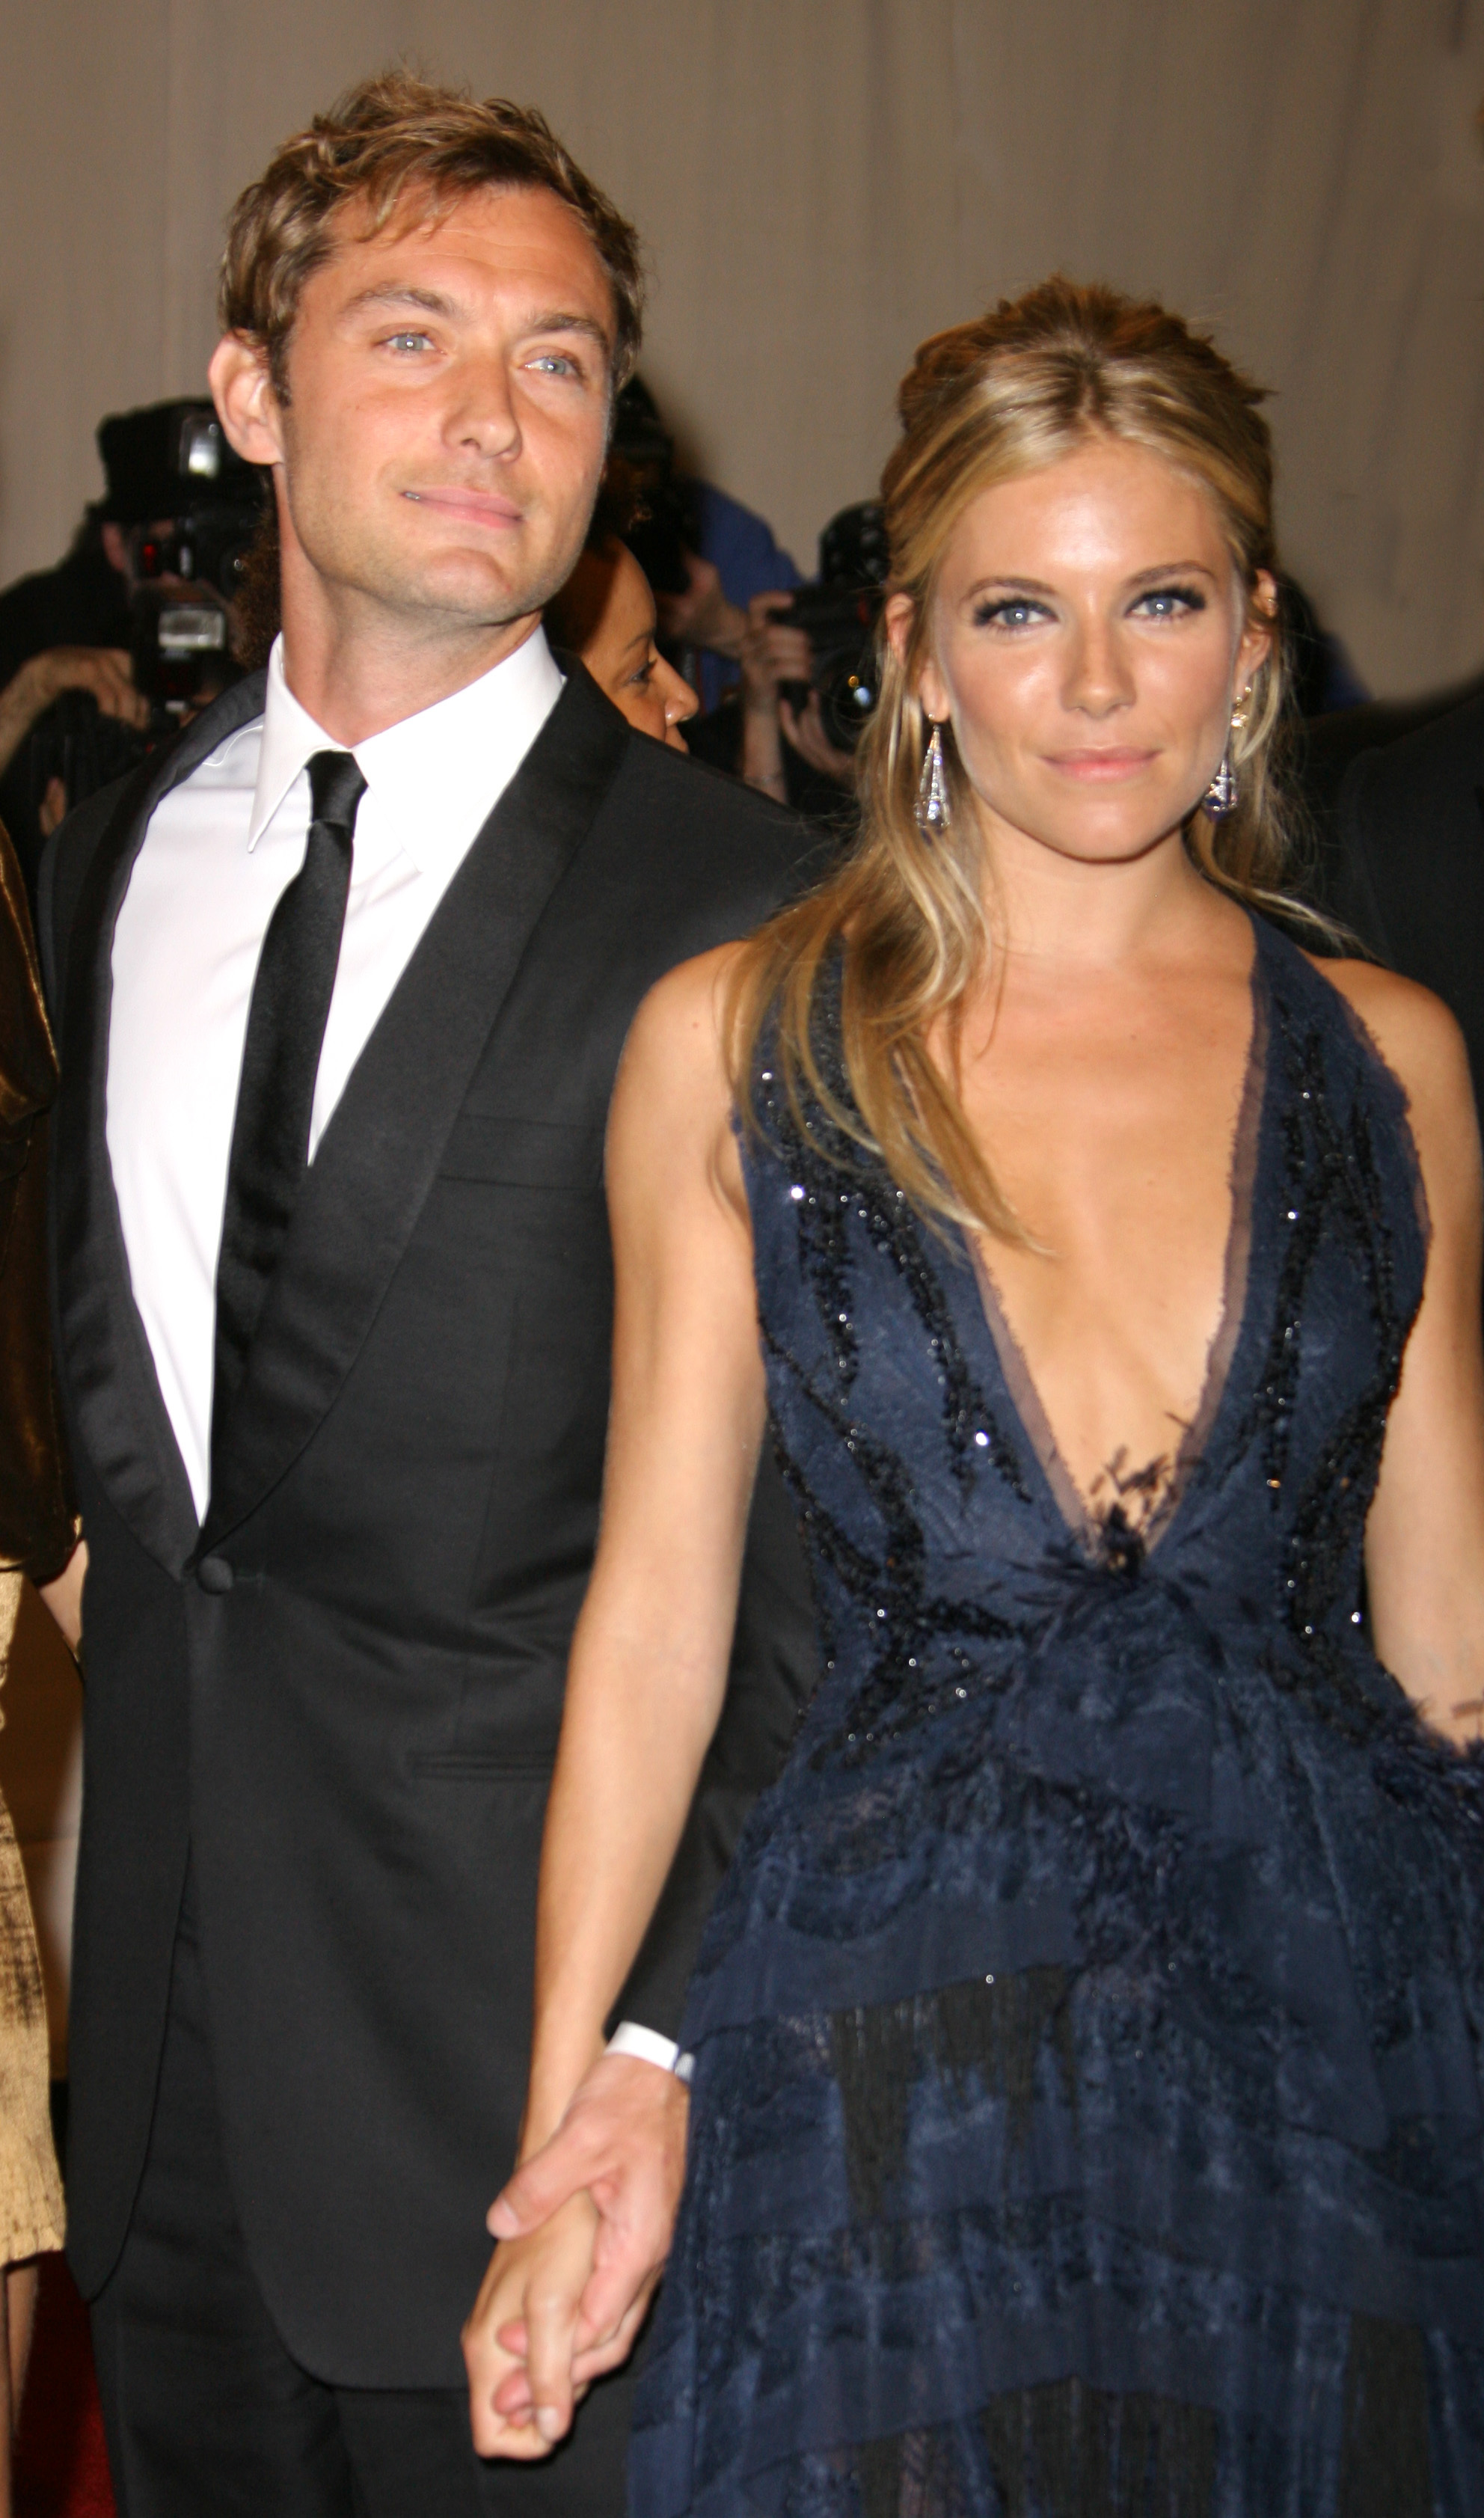 <p>Before she was caught traipsing around Europe with another woman's husband, Sienna Miller was the one being cheated on. In 2005, her then-fiancée, Jude Law, had an affair with his children's nanny, Daisy Wright, prompting Sienna to call off the engagement. They later reconciled only to call it quits for good in 2011.</p>